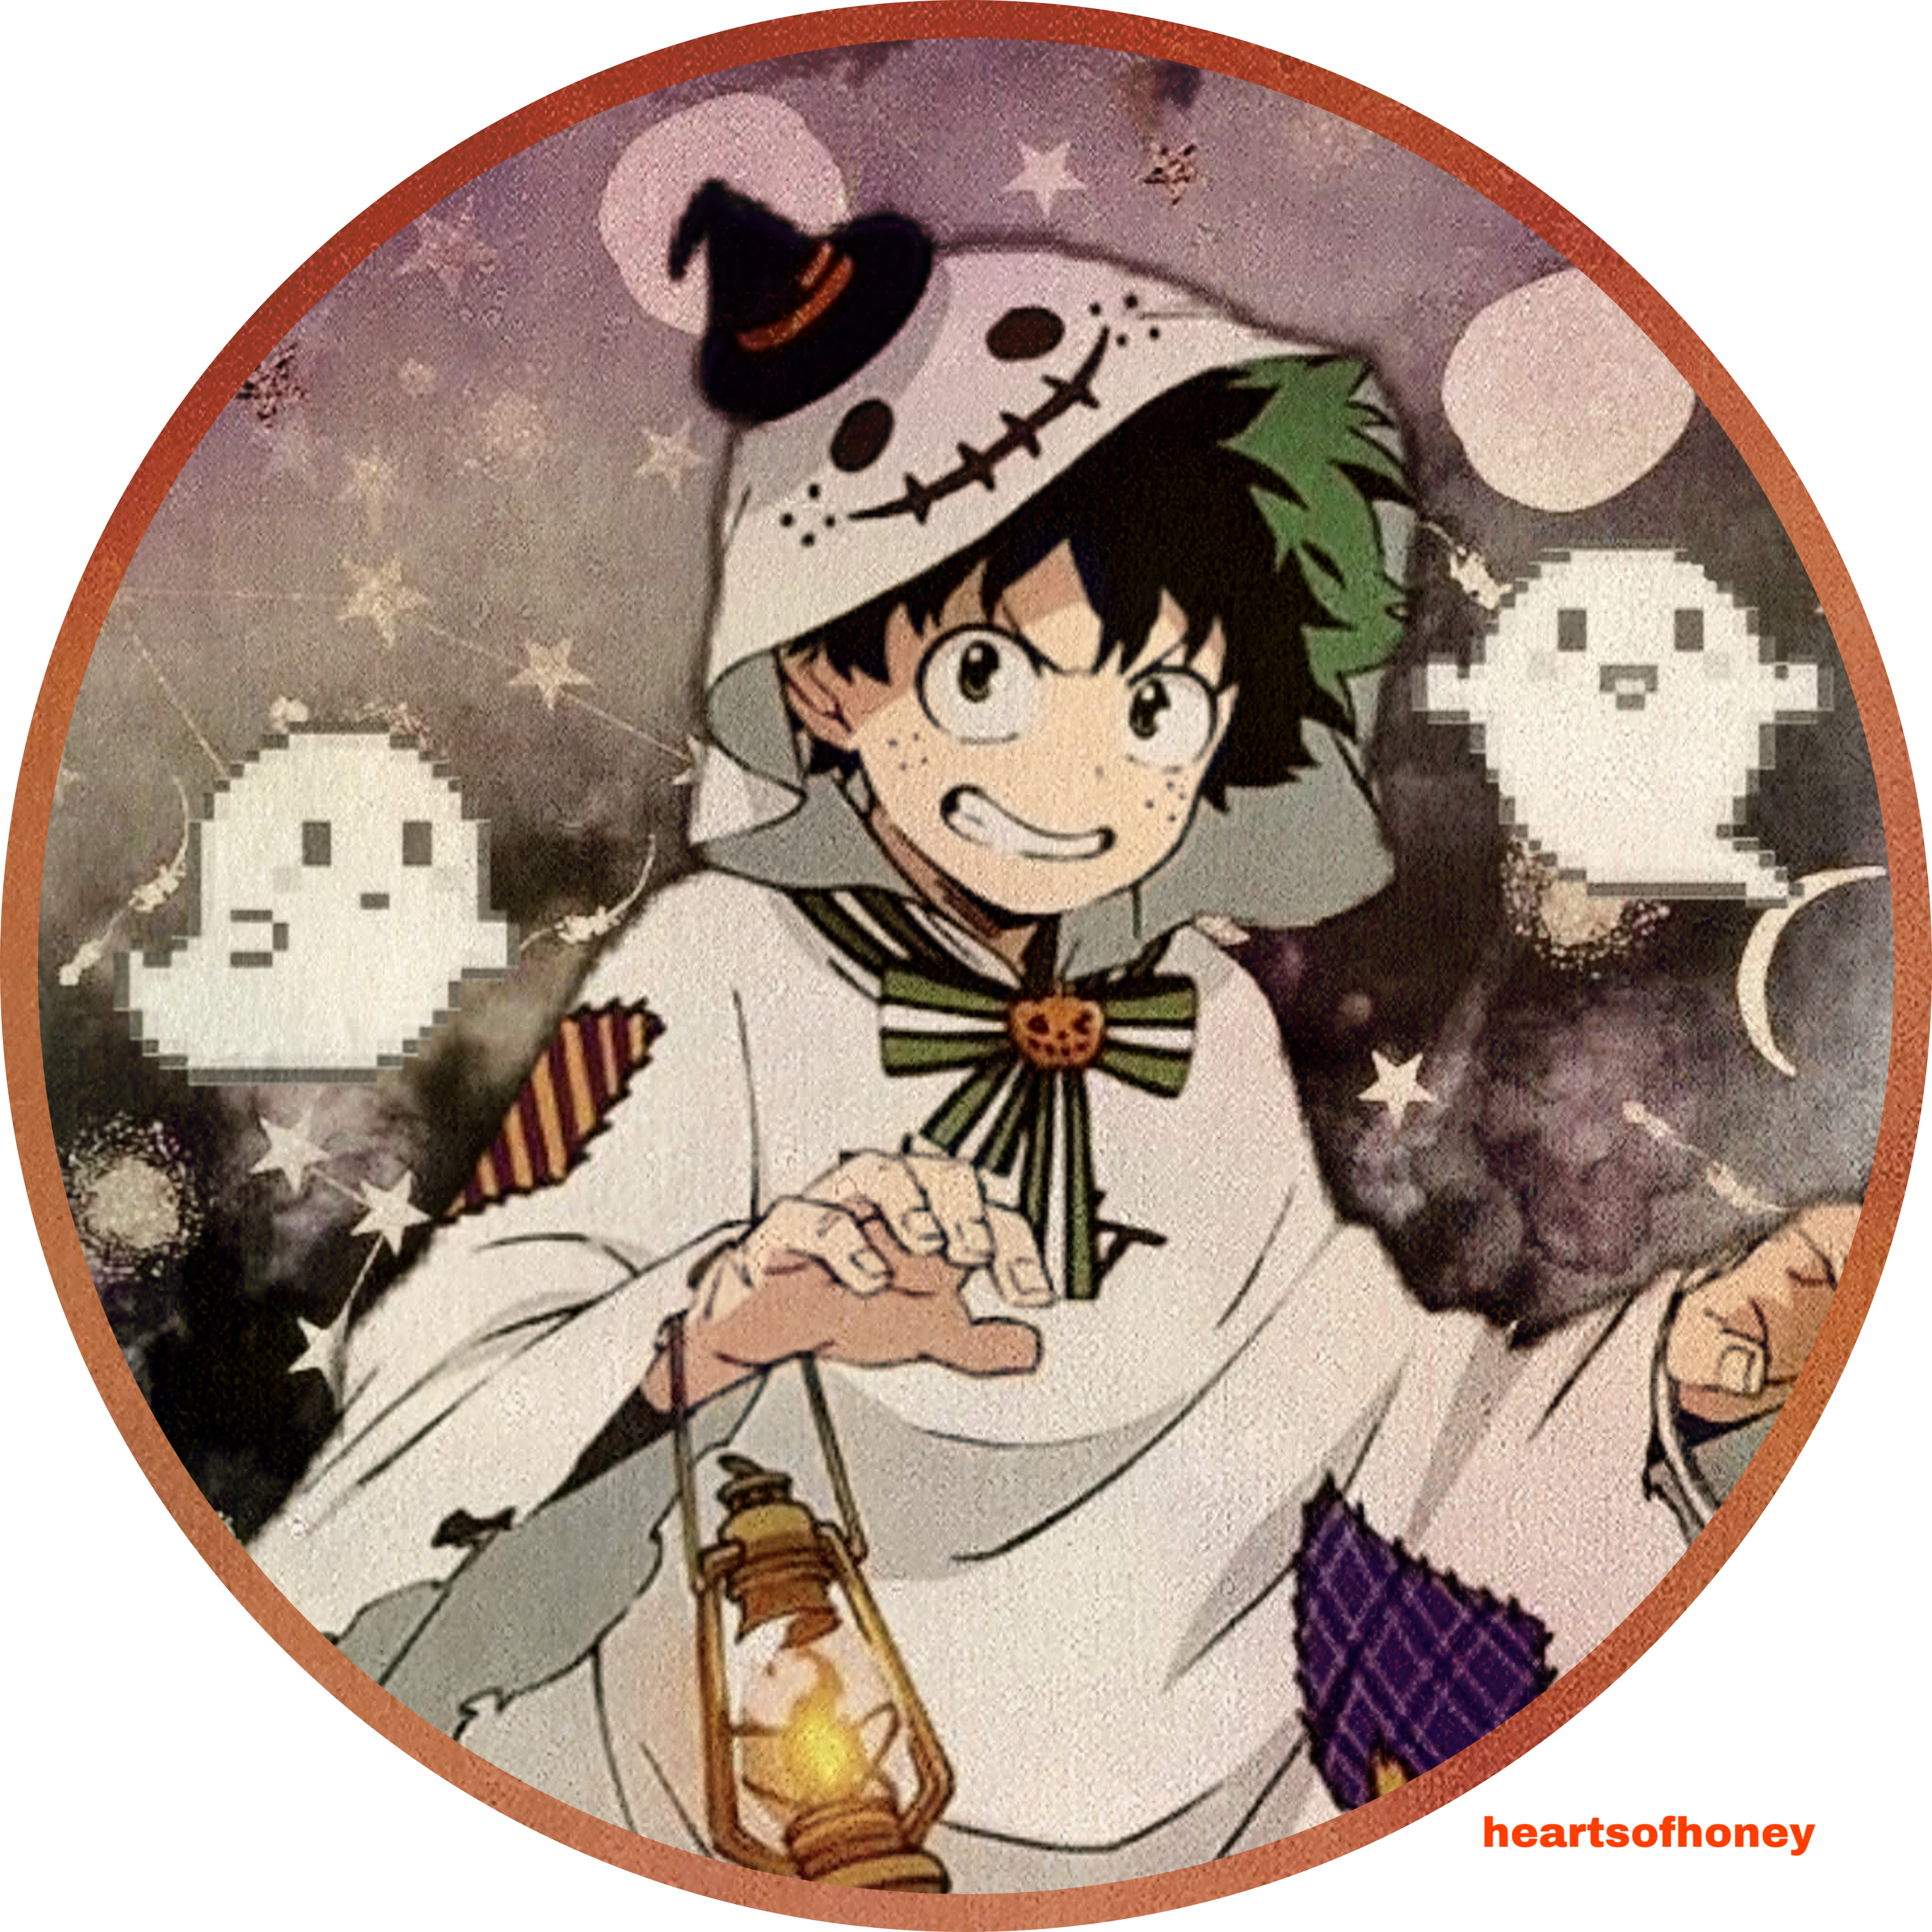 uhh spooky deku pfp for my insta !! feel free to use WITH credit